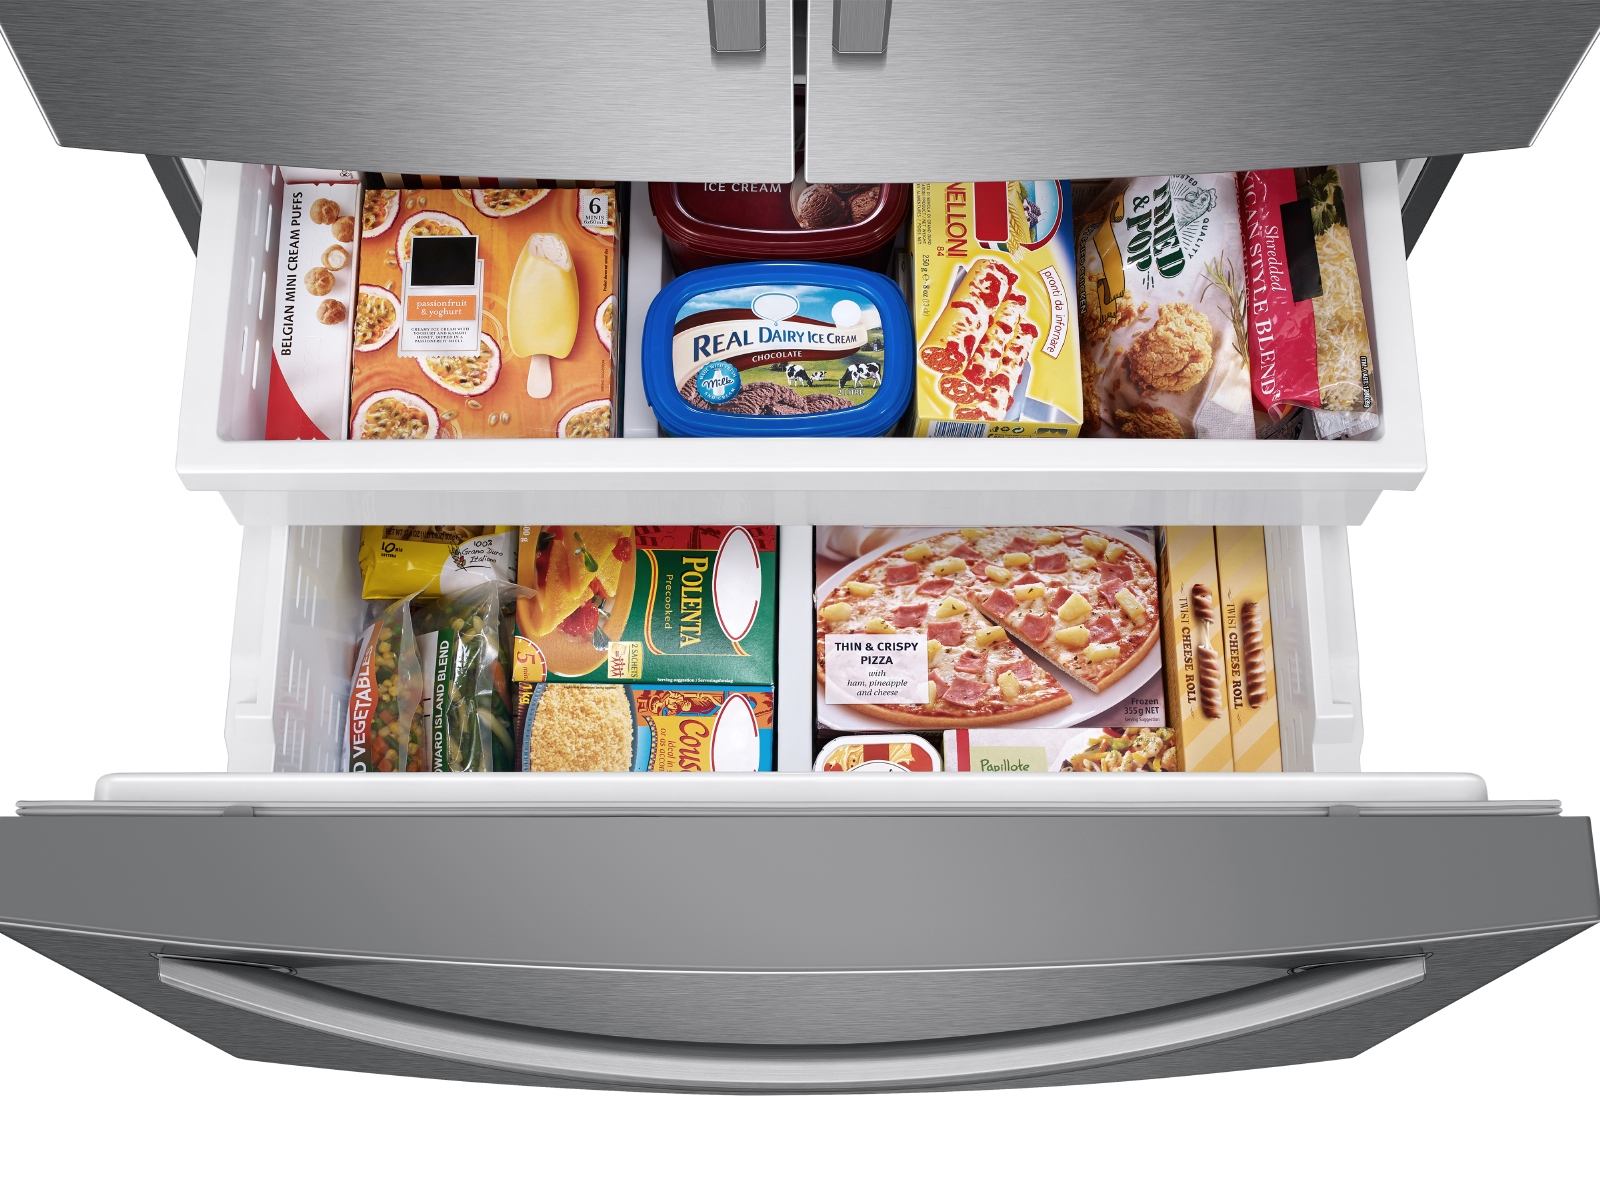 Thumbnail image of 26.5 cu. ft. Large Capacity 3-Door French Door Refrigerator with Family Hub™ and External Water & Ice Dispenser in Stainless Steel